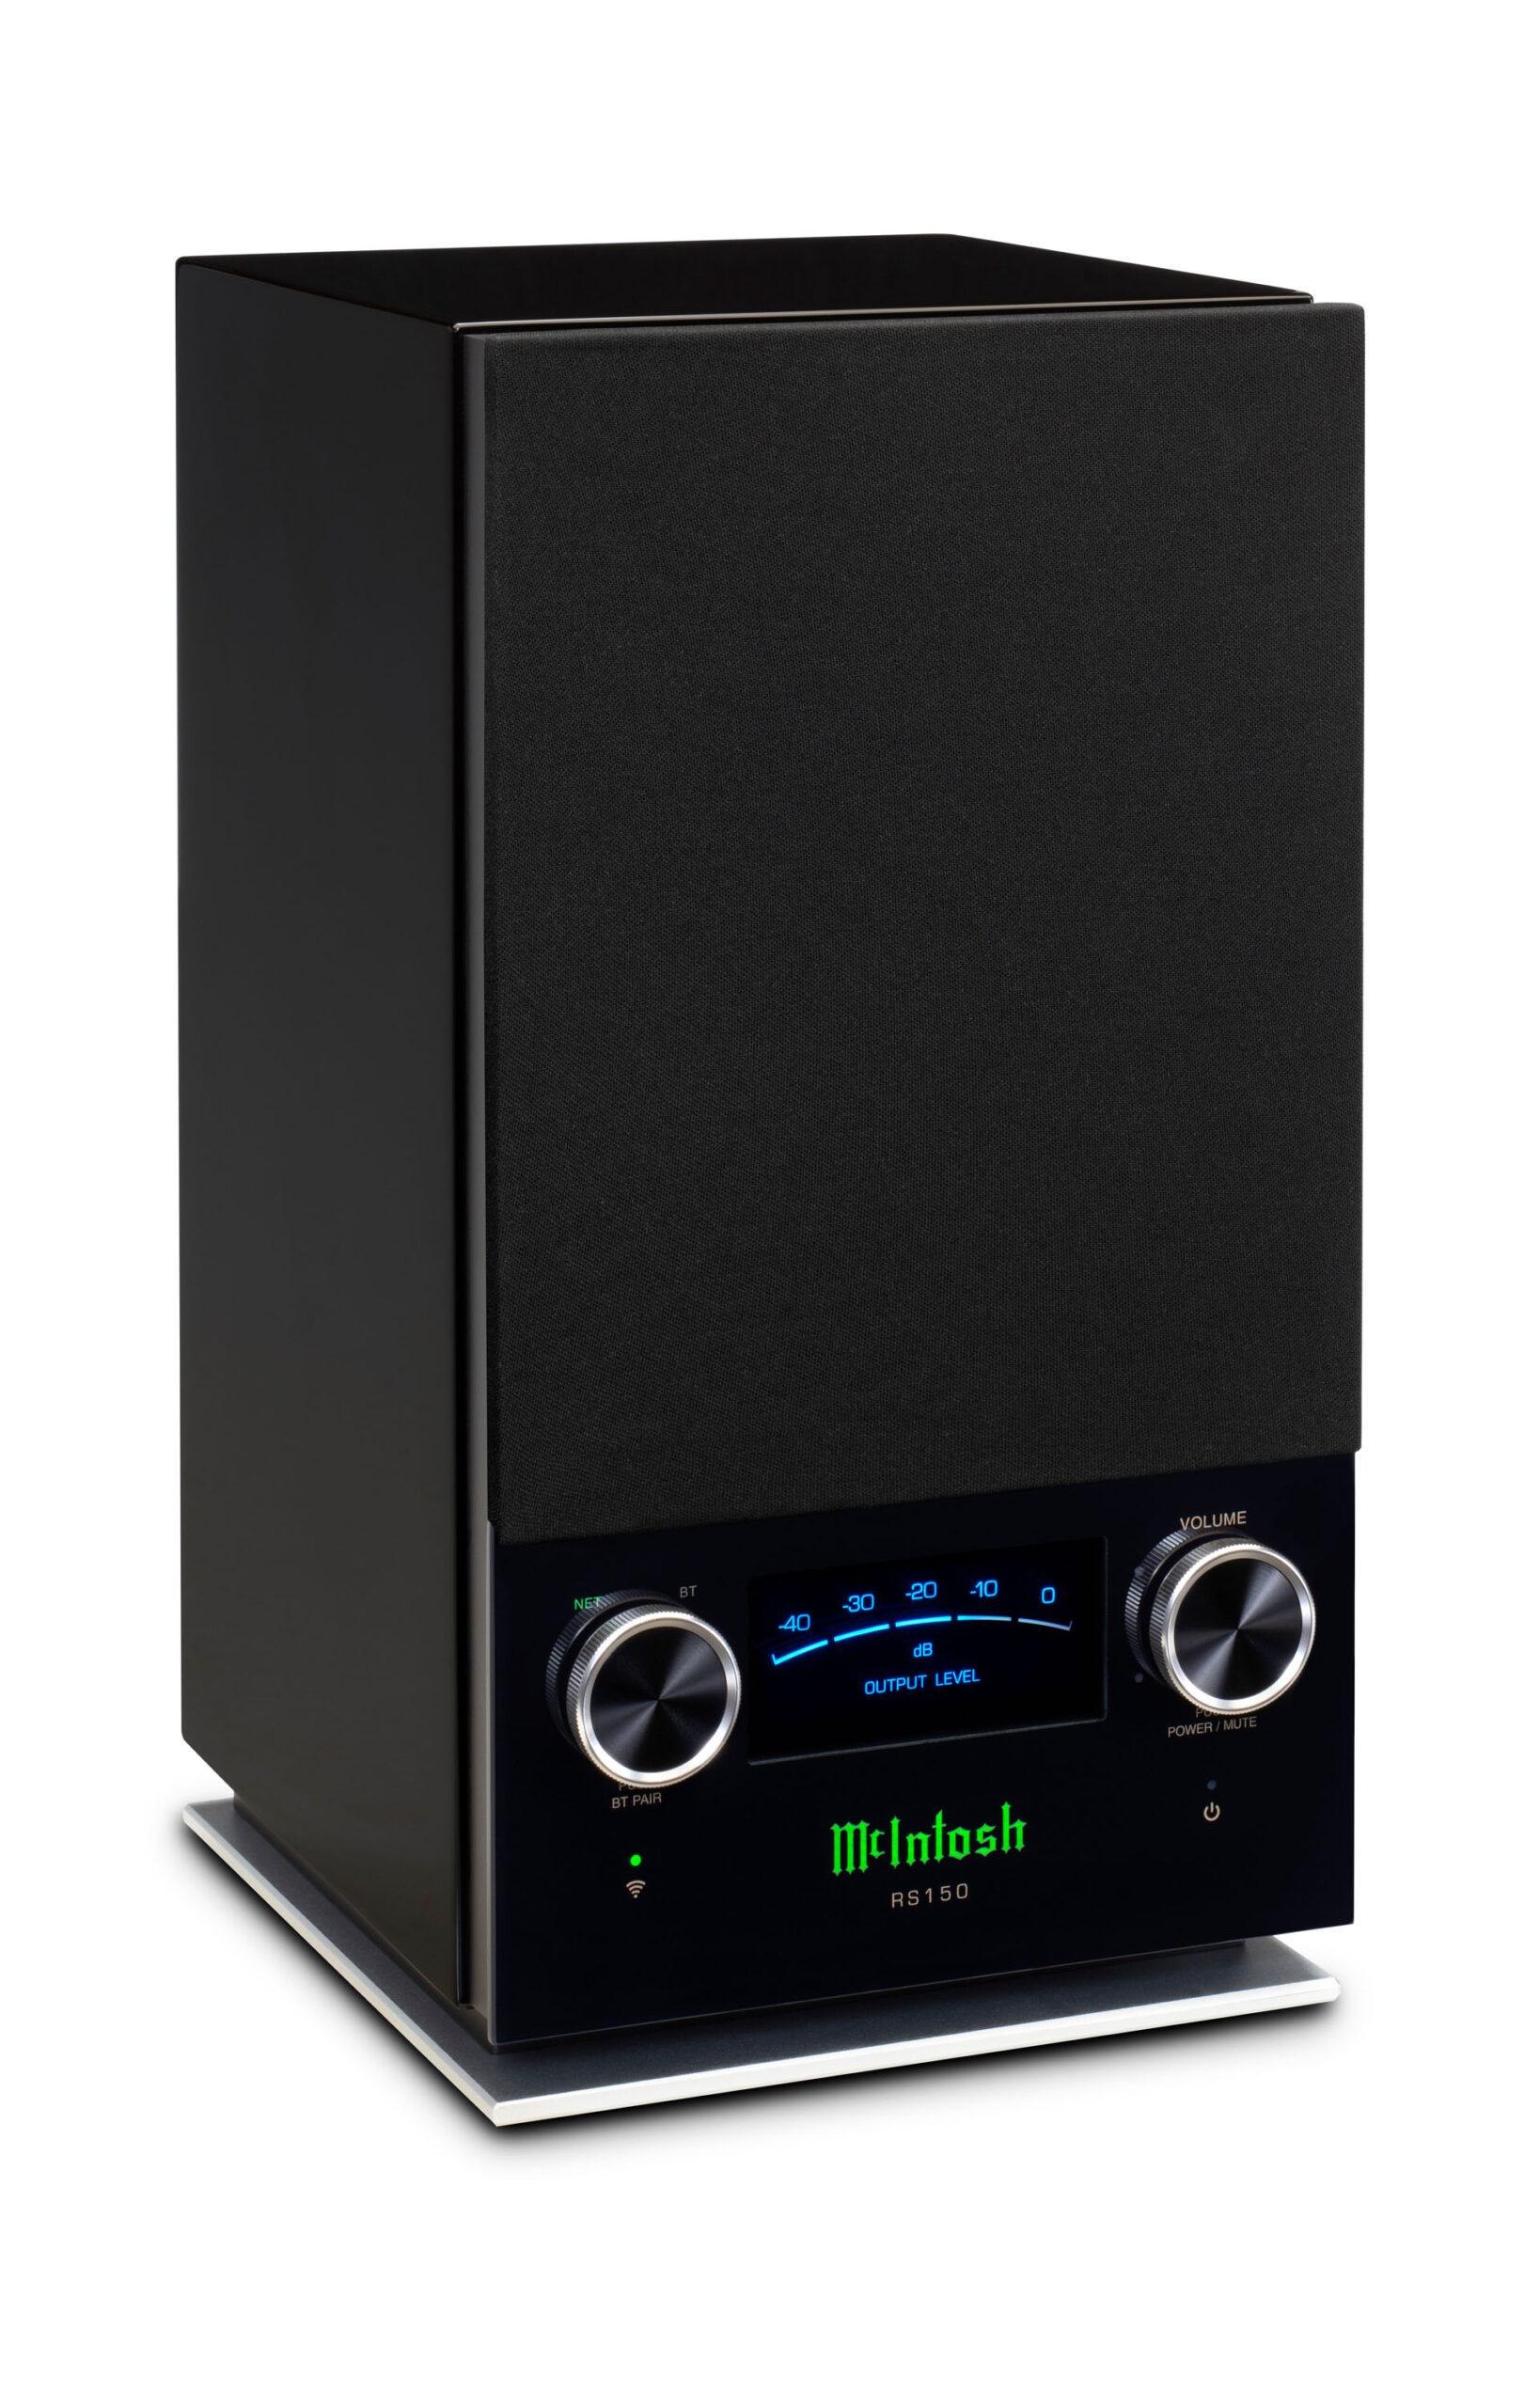 Two wireless speakers, the RS150 and RS250, offer streaming convenience with unmistakable McIntosh style, quality & performance. McIntosh 013686bf rs150 angle left hi res scaled